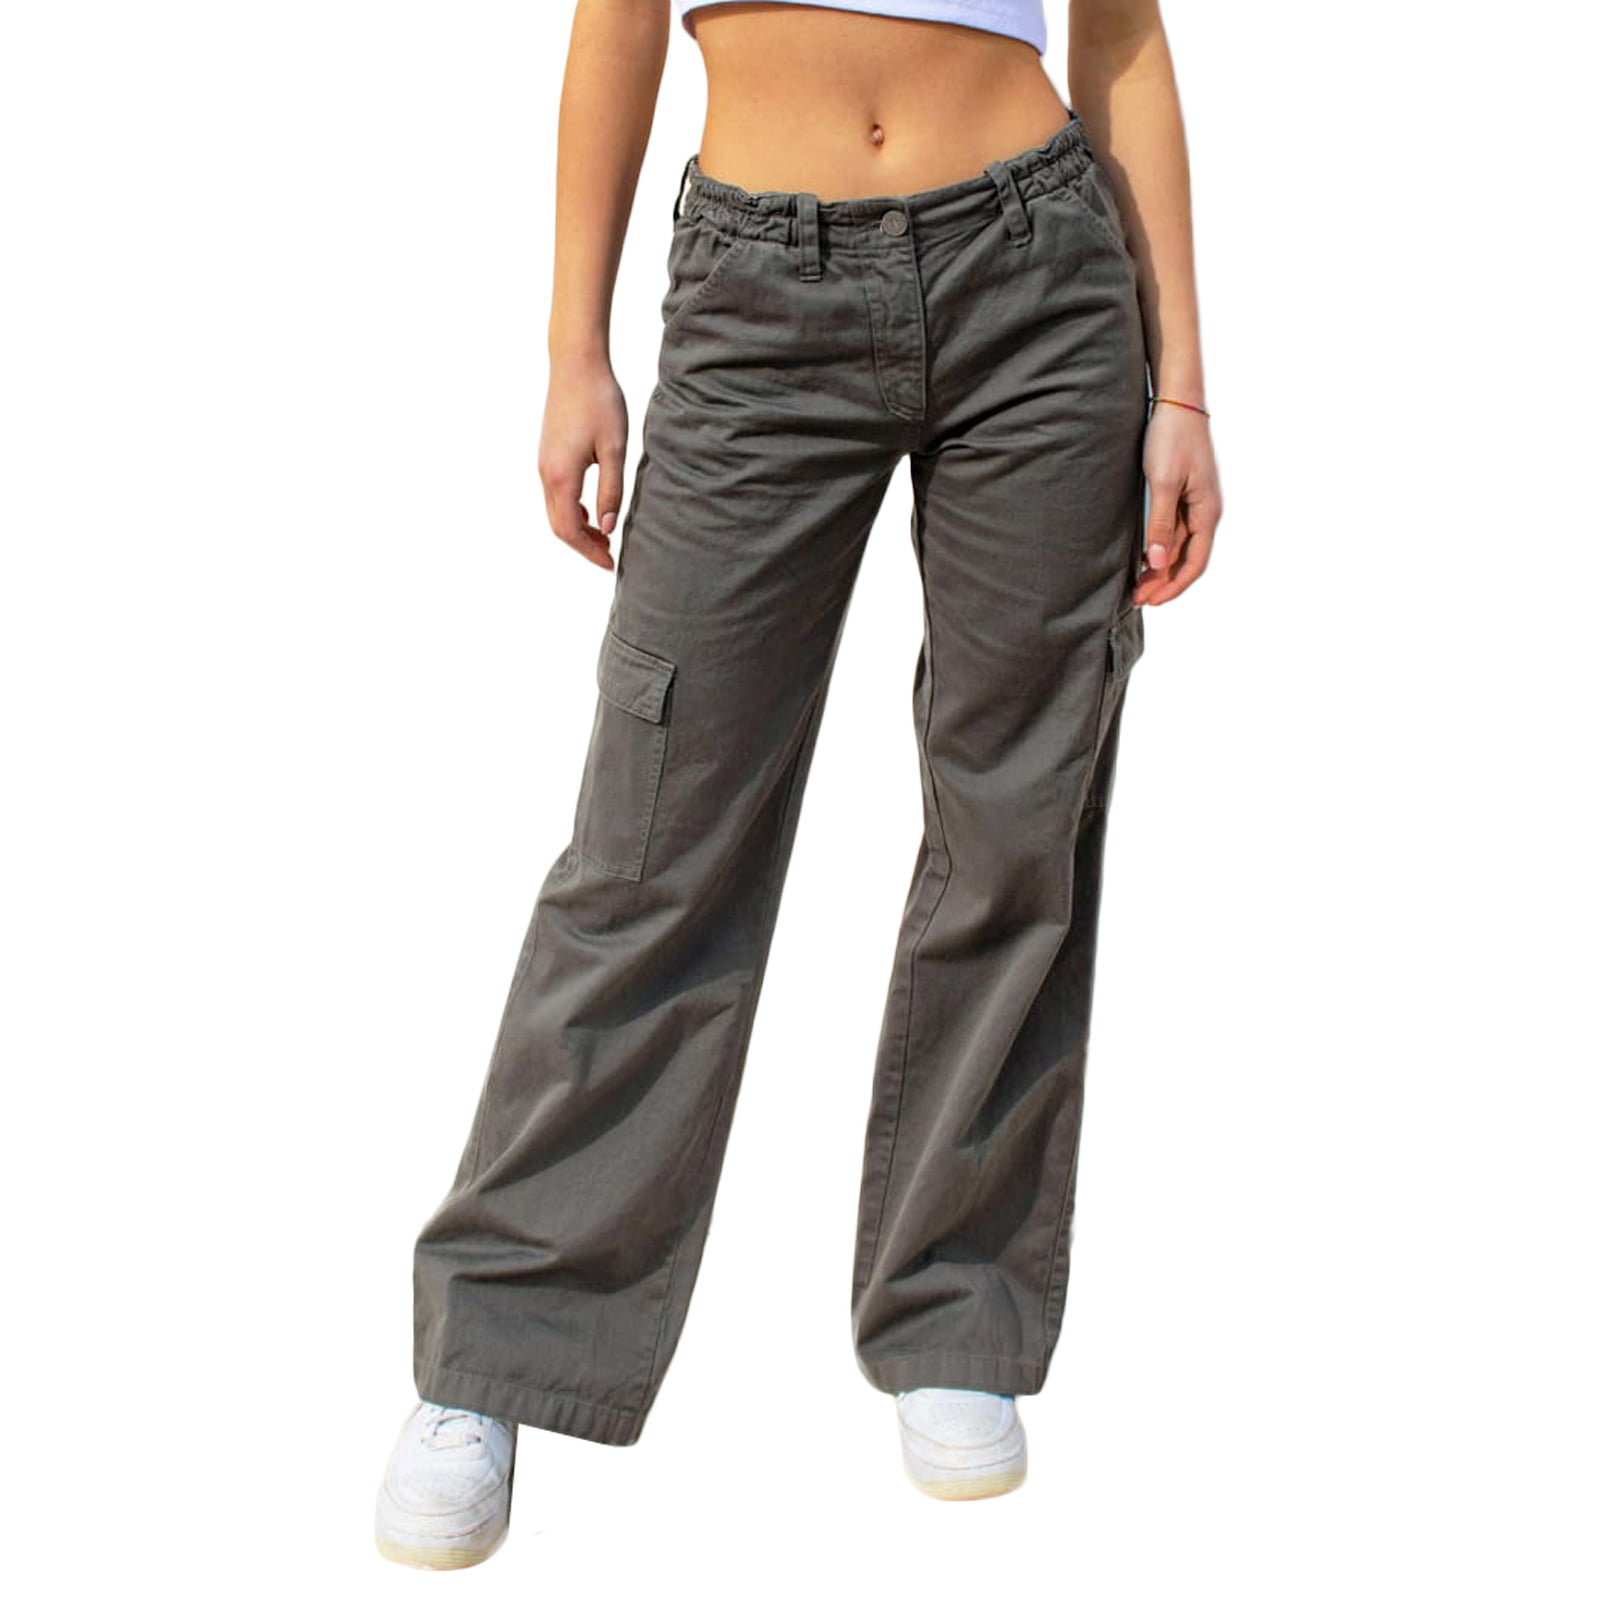 Buy Women's Solid Mid-Rise Cargo Pants with Button Closure and Pockets  Online